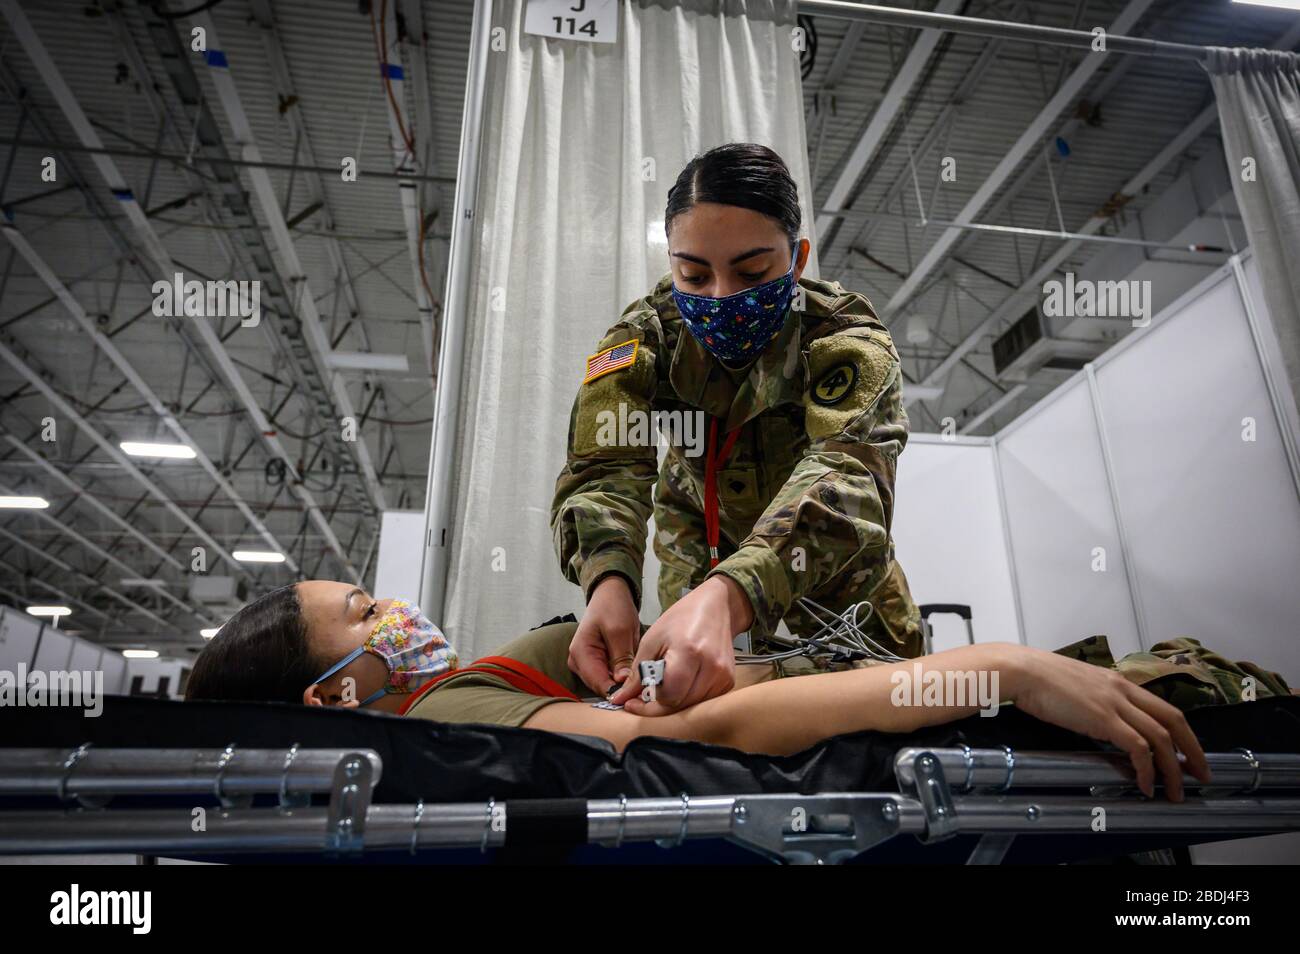 New Jersey National Guard combat medic Spc. Kayla Awad tests an electrocardiogram machine in preparation for patients at a Federal Medical Station COVID-19, coronavirus pandemic relief facility set up at the Meadowlands Center April 6, 2020 in Secaucus, New Jersey. Stock Photo